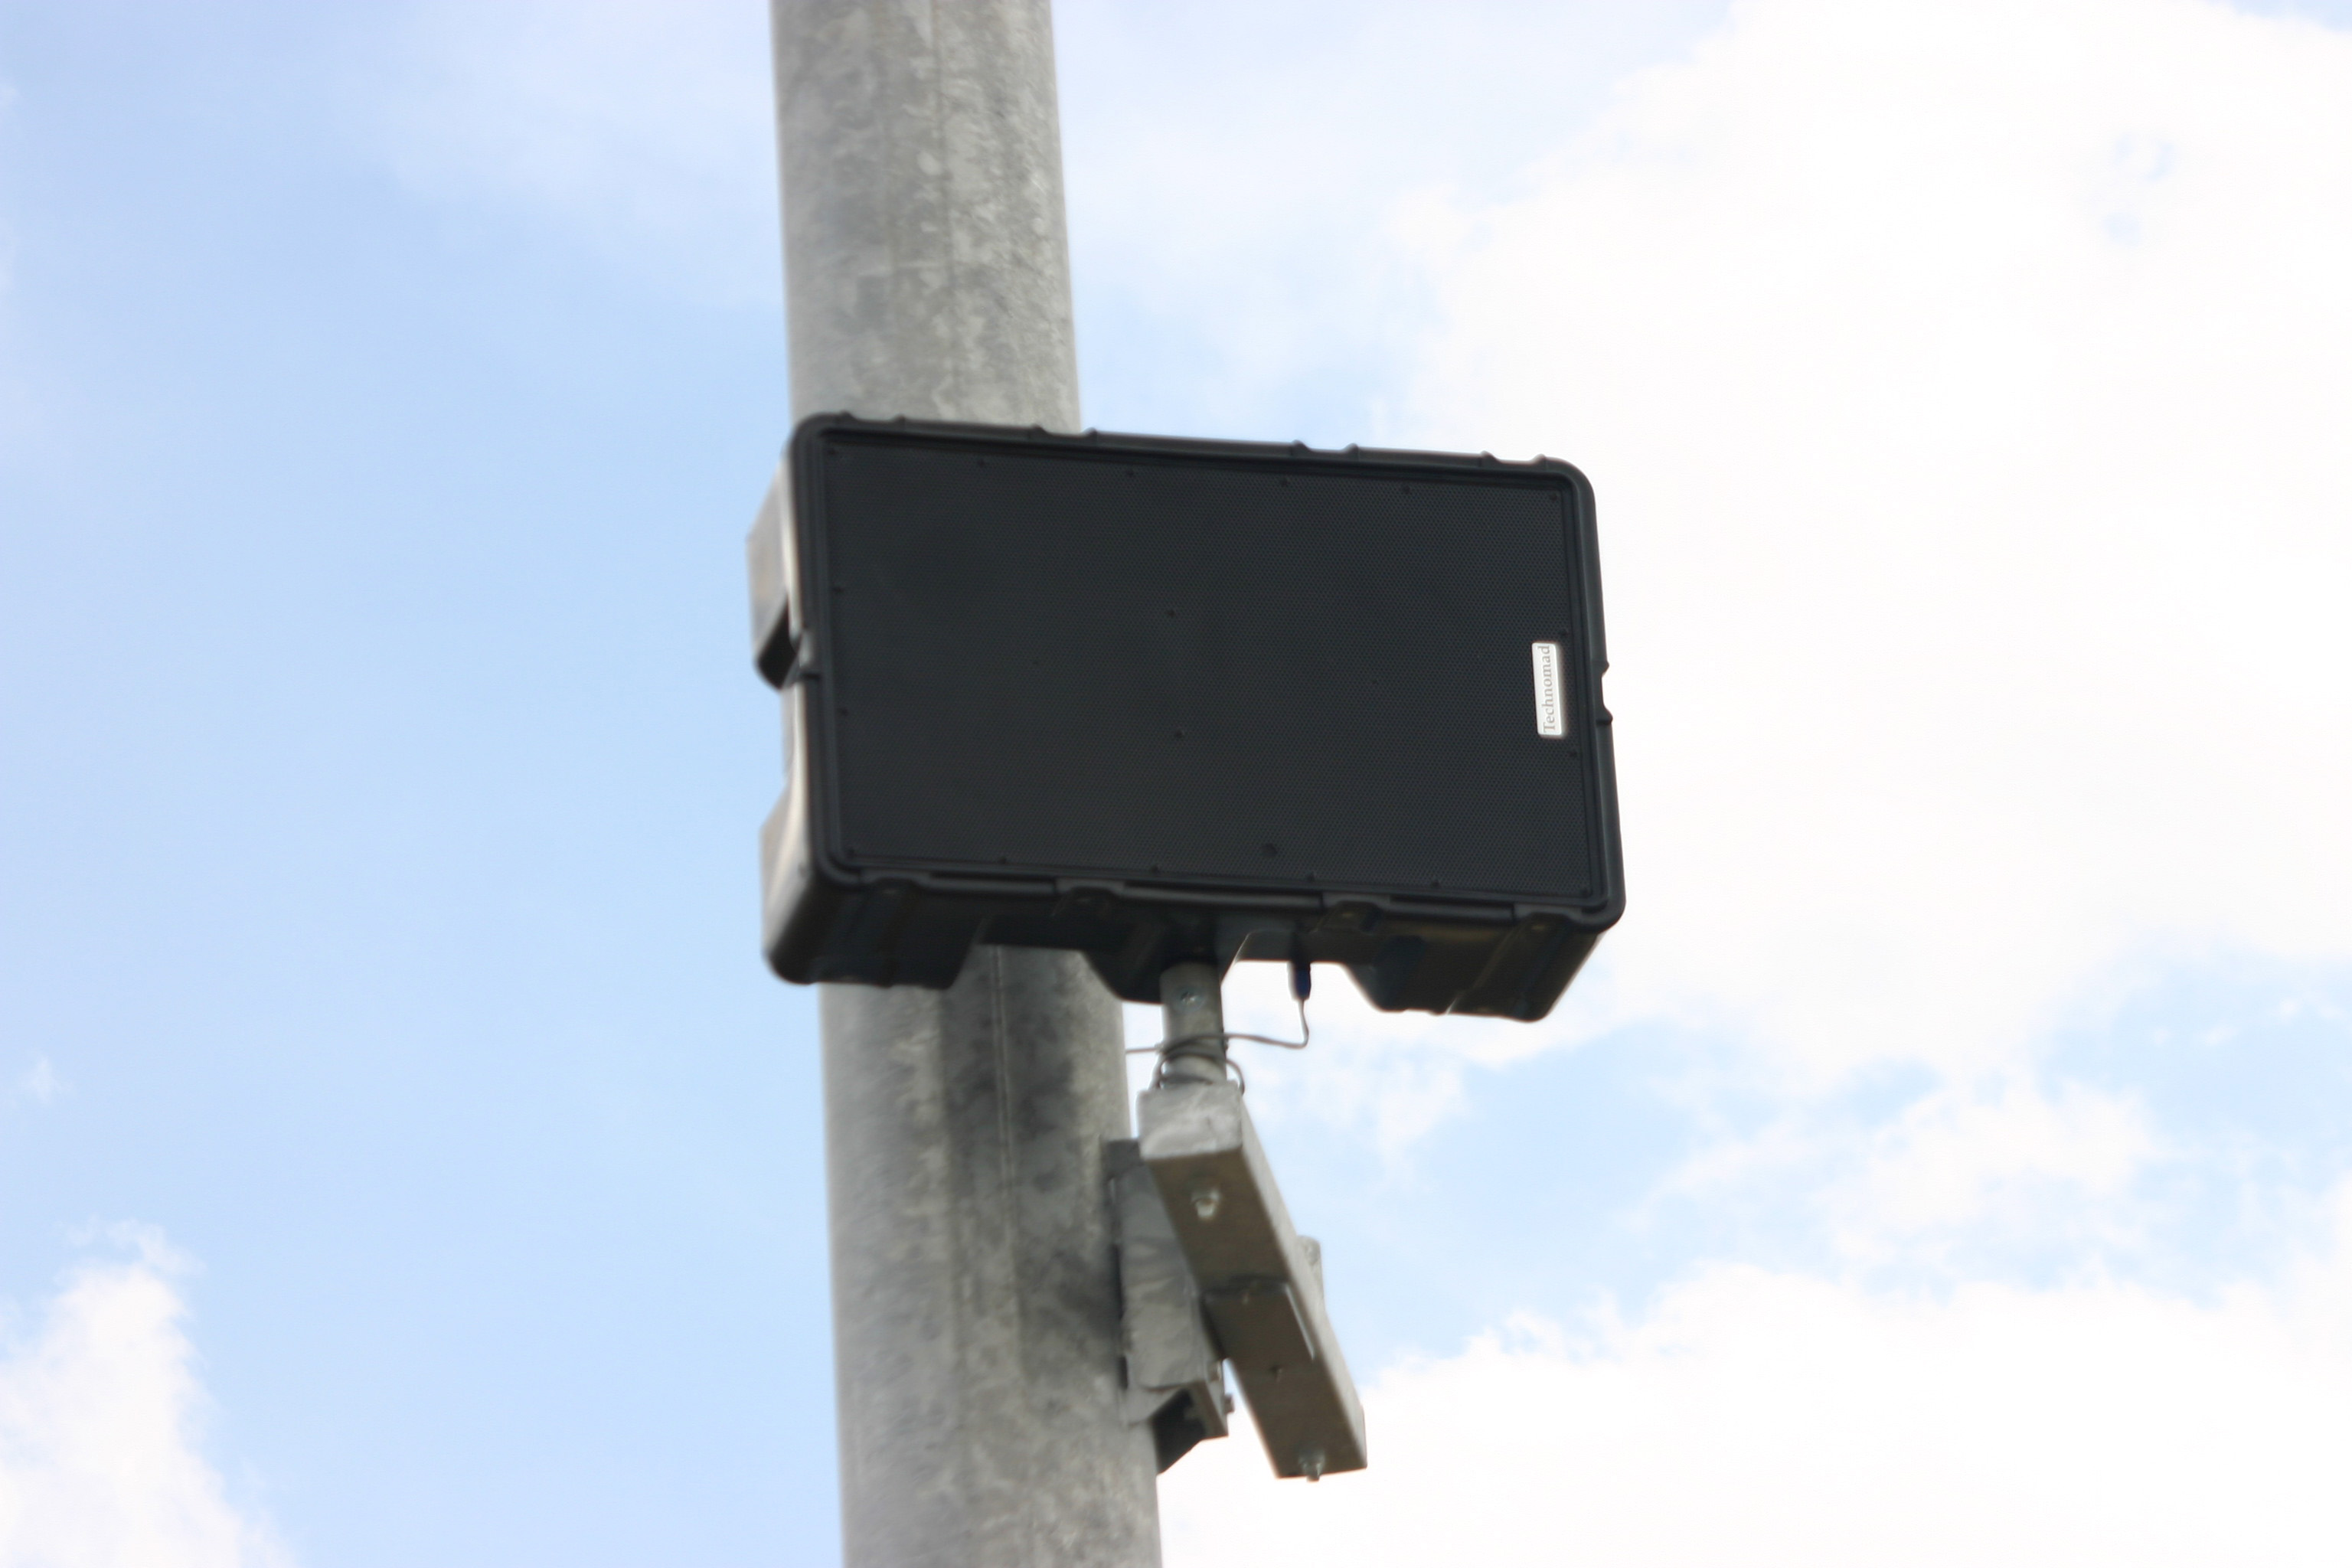 A Technomad Berlin loudspeaker installed on a light pole outdoors and unprotected from the elements